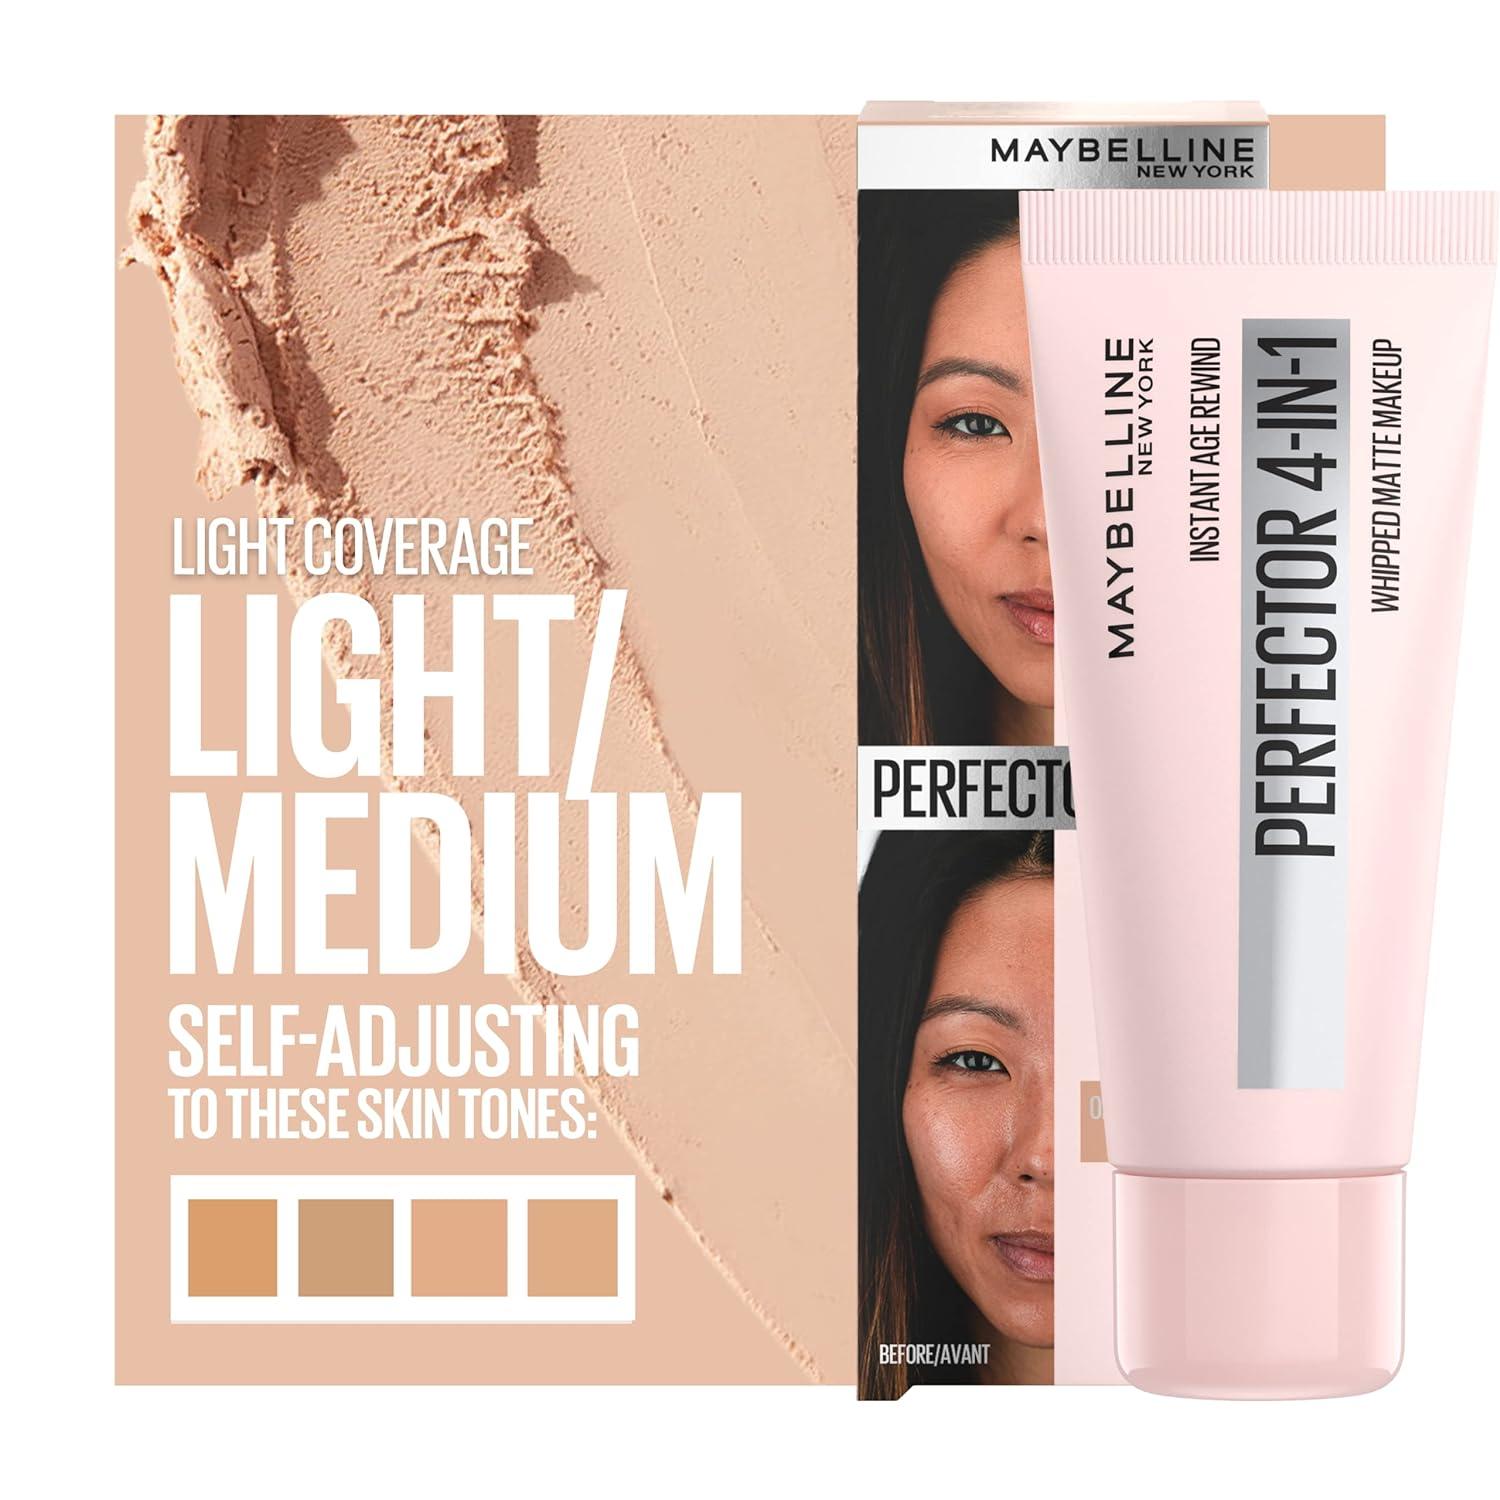 Makeup New Light/Medium Age York 1 Instant Count Instant 4-In-1 Matte Perfector 02 Rewind Maybelline